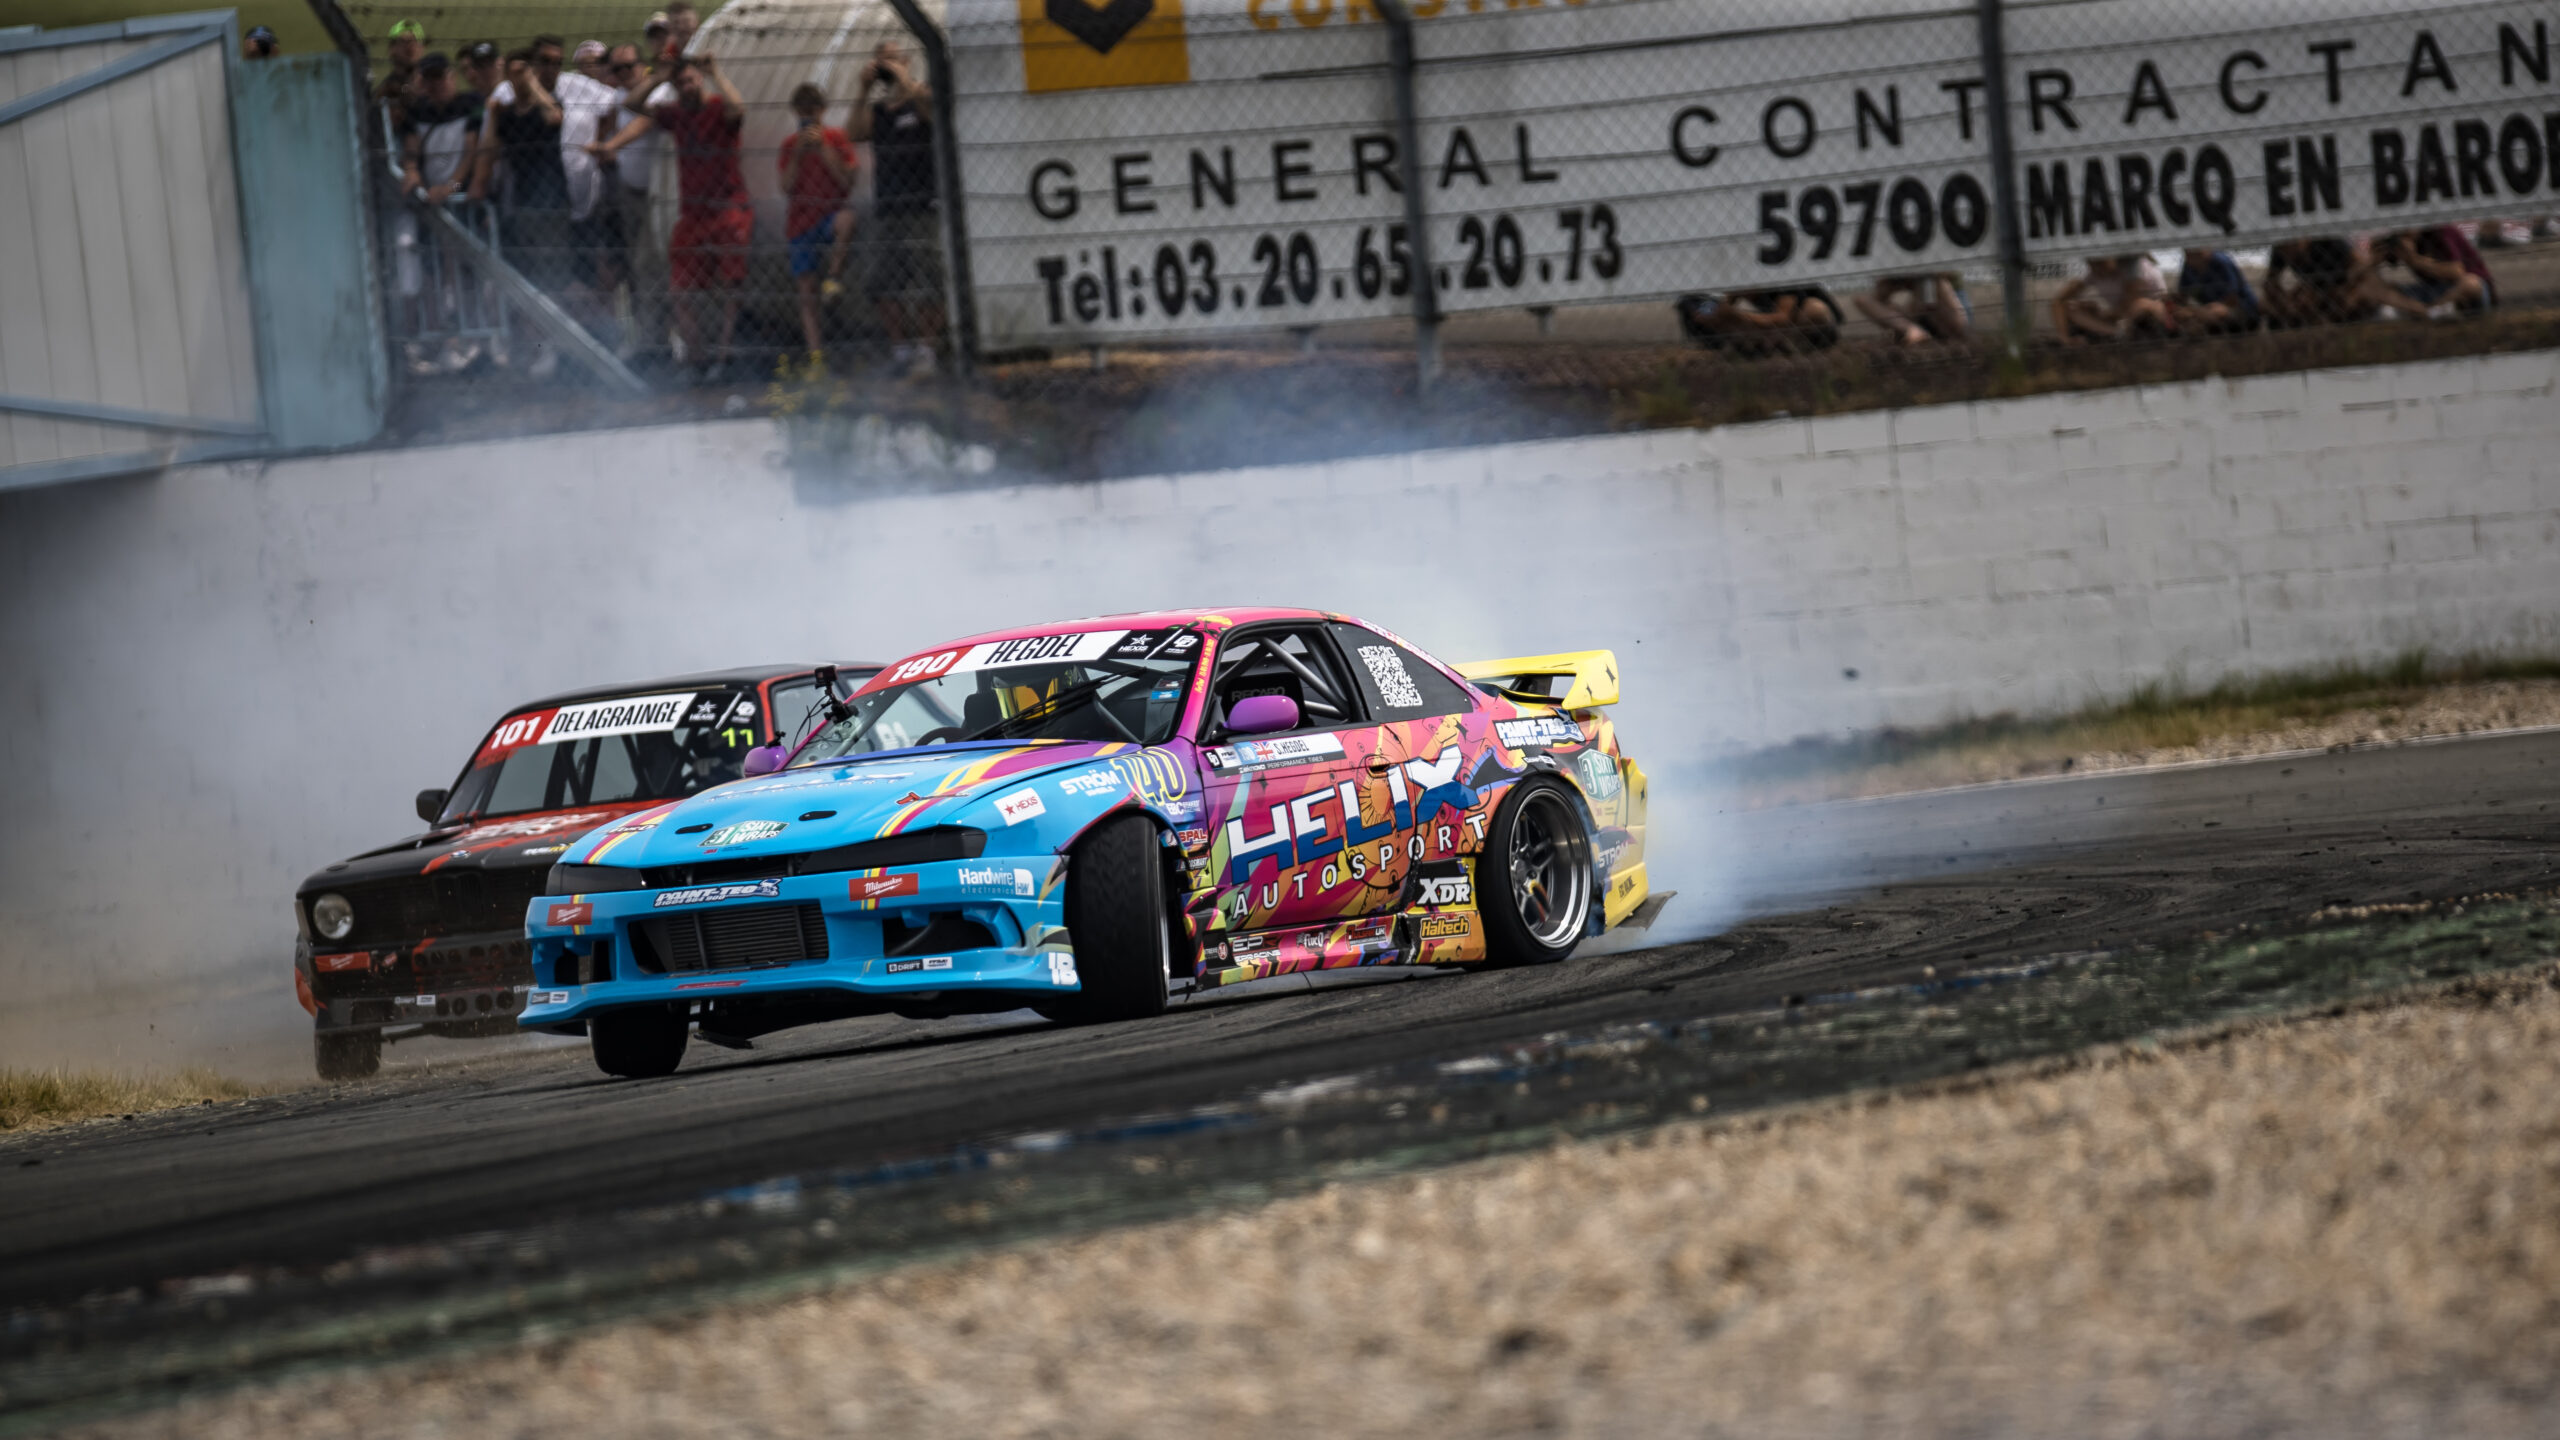 EBC-Equipped Drifter Makes Guest Appearance at Drift France Round